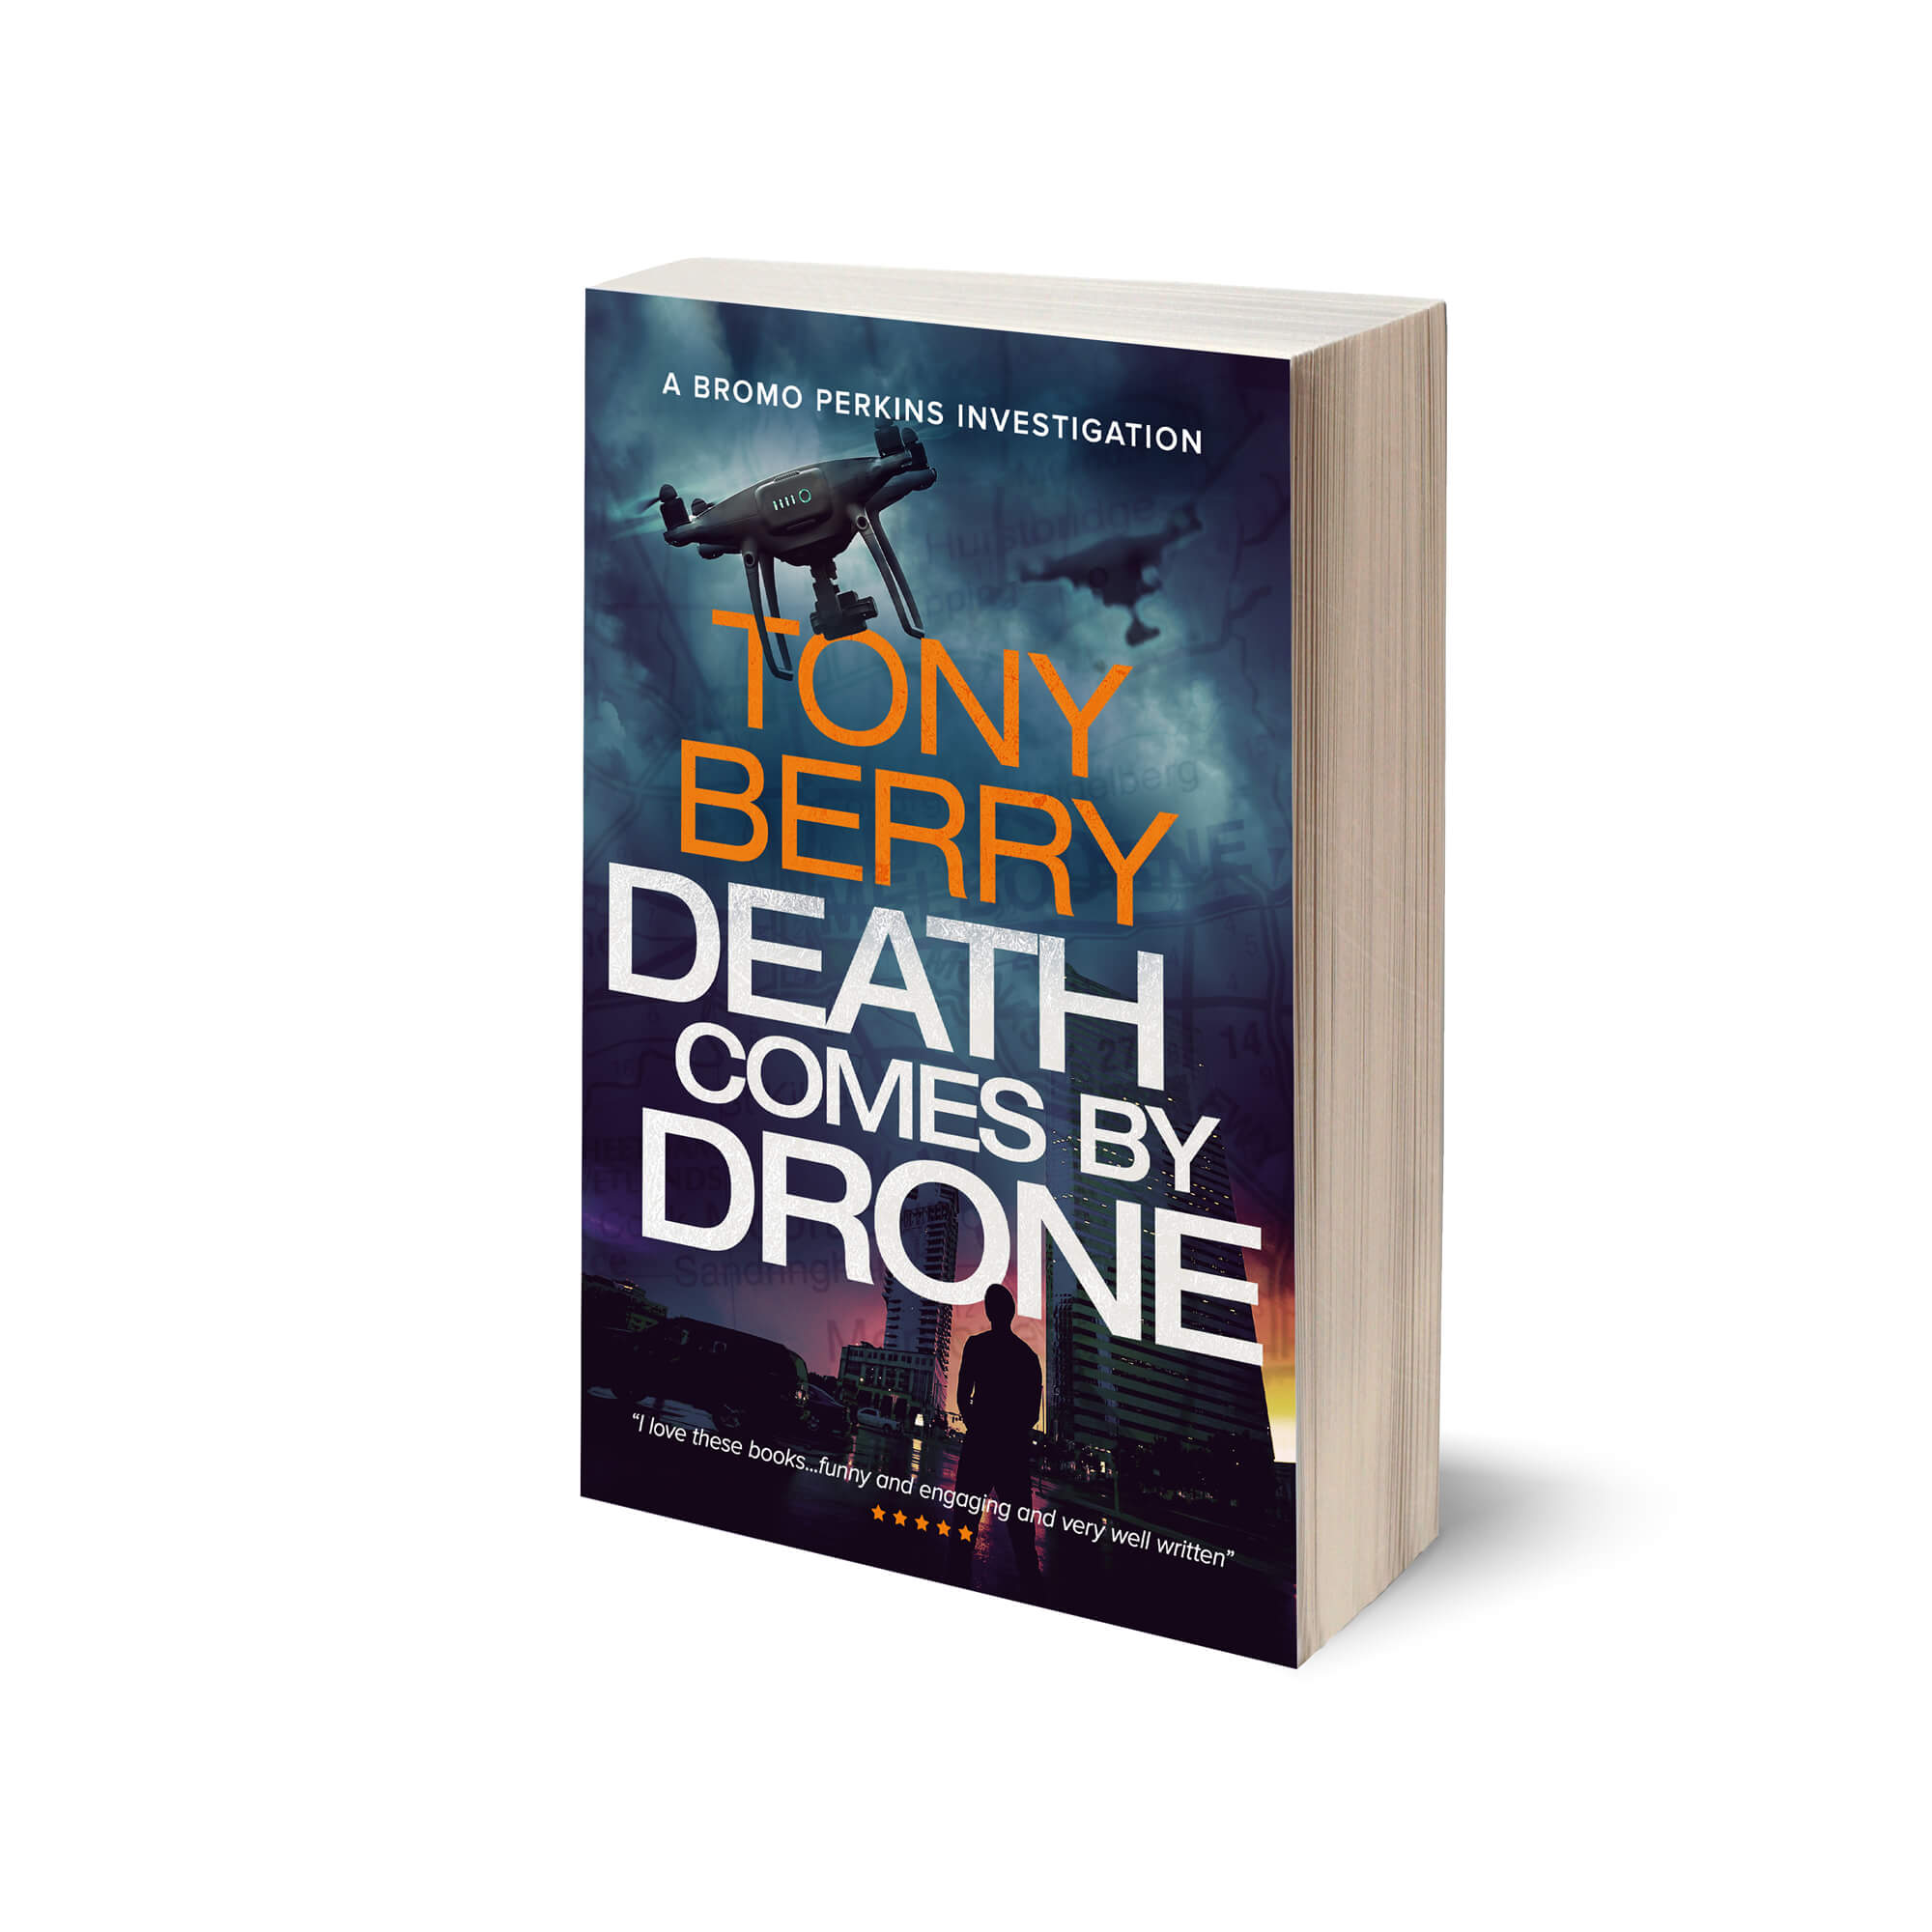 https://www.tonyberryauthor.com/wp-content/uploads/2021/05/Death-Comes-By-Drone-crime-fiction-by-Tony-Berry.jpeg